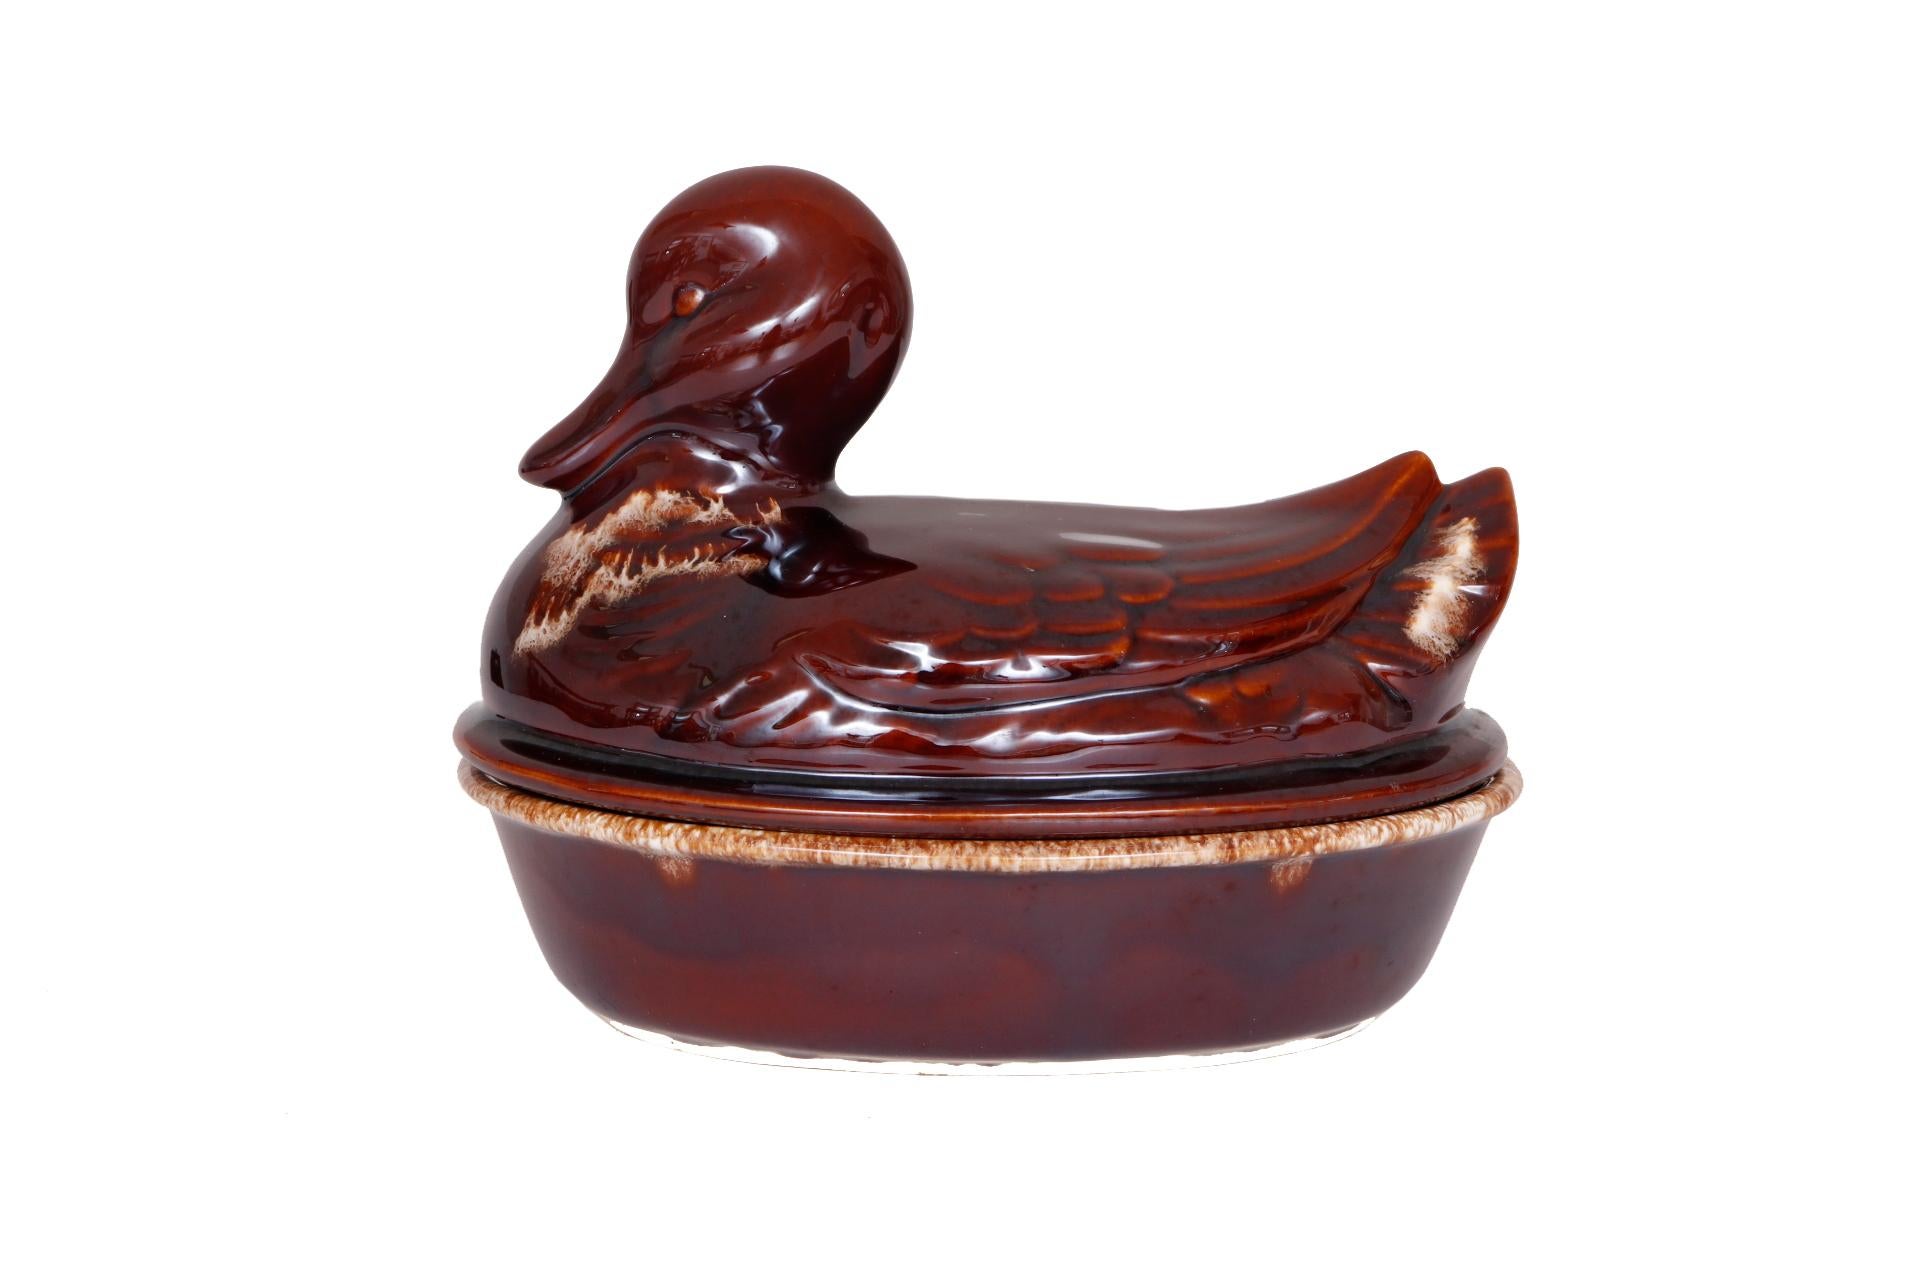 A duck shaped serving dish made by Hull Pottery and Co. An oval dish and duck shaped lid are decorated in a rich brown drip glaze. The duck is pressed with eye and feather details. Marked underneath “H.P. Co Oven Proof USA”.